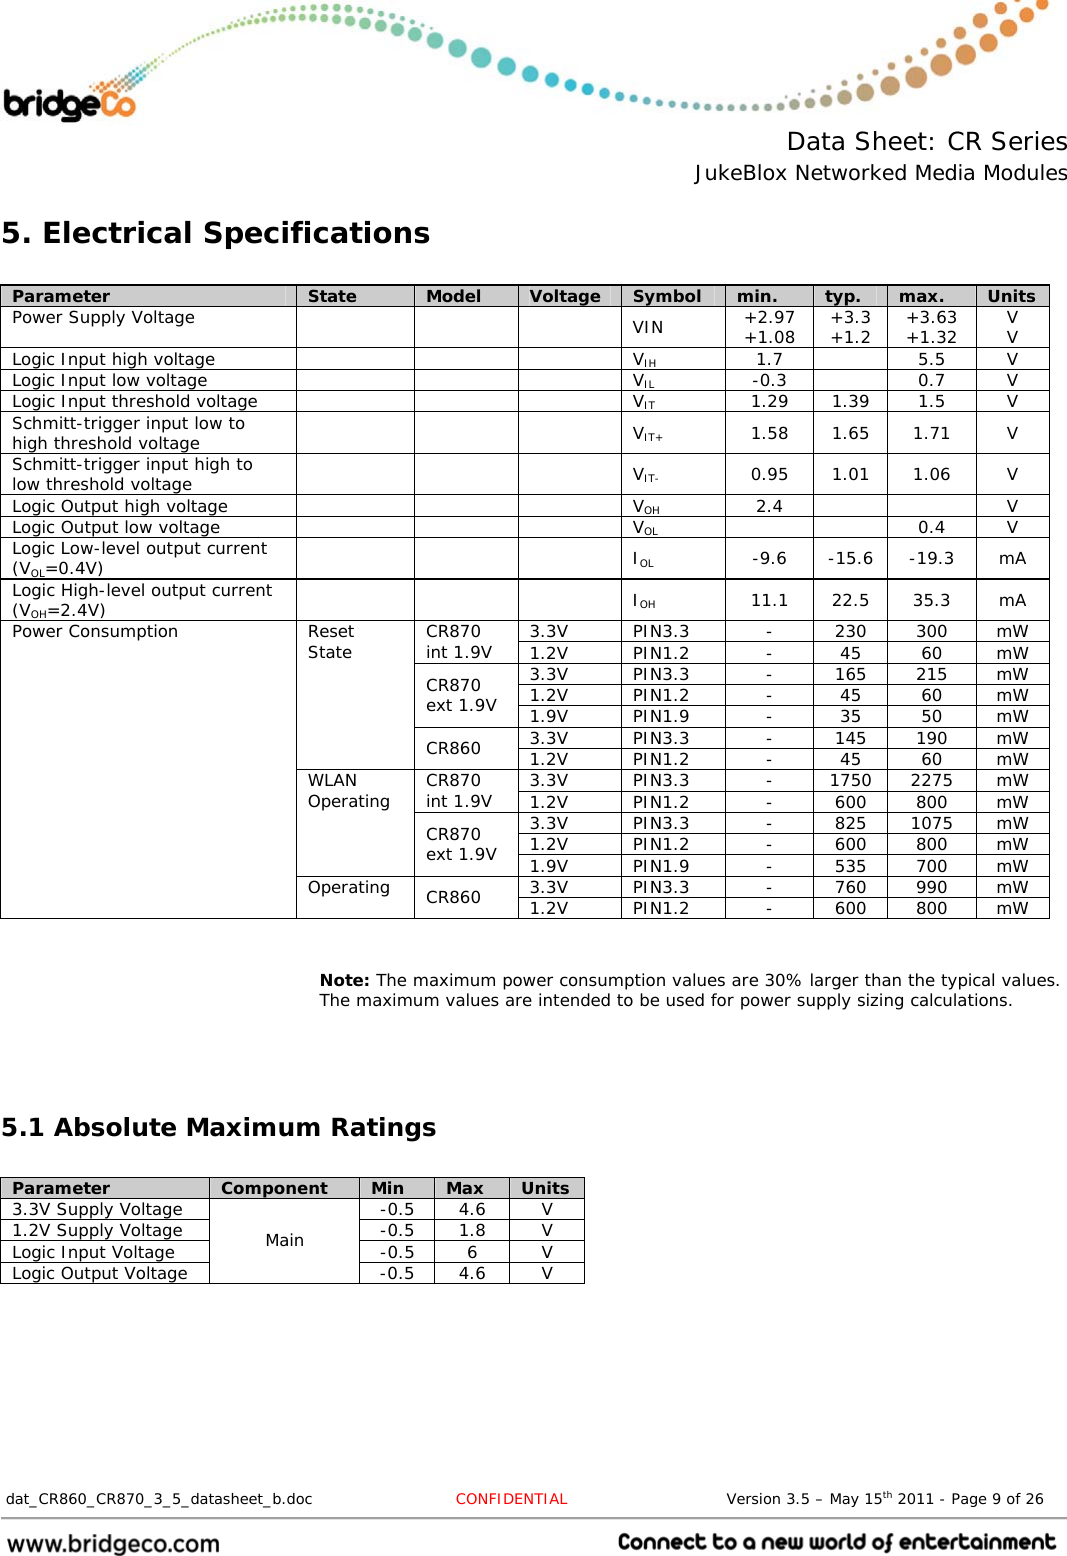  Data Sheet: CR Series JukeBlox Networked Media Modules  dat_CR860_CR870_3_5_datasheet_b.doc   CONFIDENTIAL                               Version 3.5 – May 15th 2011 - Page 9 of 26                                 5. Electrical Specifications  Parameter  State  Model  Voltage  Symbol  min.  typ.  max.  Units Power Supply Voltage        VIN  +2.97 +1.08  +3.3 +1.2  +3.63 +1.32  V V Logic Input high voltage        VIH 1.7  5.5 V Logic Input low voltage        VIL -0.3  0.7 V Logic Input threshold voltage        VIT 1.29 1.39 1.5 V Schmitt-trigger input low to high threshold voltage     VIT+ 1.58 1.65 1.71 V Schmitt-trigger input high to low threshold voltage     VIT- 0.95 1.01 1.06 V Logic Output high voltage        VOH 2.4   V Logic Output low voltage        VOL   0.4 V Logic Low-level output current (VOL=0.4V)     IOL -9.6 -15.6 -19.3 mA Logic High-level output current (VOH=2.4V)     IOH 11.1 22.5 35.3 mA 3.3V PIN3.3  - 230 300 mW CR870 int 1.9V  1.2V PIN1.2  - 45 60 mW 3.3V PIN3.3  - 165 215 mW 1.2V PIN1.2  - 45 60 mW CR870 ext 1.9V  1.9V PIN1.9  - 35 50 mW 3.3V PIN3.3  - 145 190 mW Reset State CR860  1.2V PIN1.2  - 45 60 mW 3.3V PIN3.3  - 1750 2275 mW CR870 int 1.9V  1.2V PIN1.2  - 600 800 mW 3.3V PIN3.3  - 825 1075 mW 1.2V PIN1.2  - 600 800 mW WLAN Operating CR870 ext 1.9V  1.9V PIN1.9  - 535 700 mW 3.3V PIN3.3  - 760 990 mW Power Consumption Operating  CR860  1.2V PIN1.2  - 600 800 mW   Note: The maximum power consumption values are 30% larger than the typical values. The maximum values are intended to be used for power supply sizing calculations.   5.1 Absolute Maximum Ratings  Parameter  Component  Min  Max  Units 3.3V Supply Voltage  -0.5  4.6  V 1.2V Supply Voltage  -0.5  1.8  V Logic Input Voltage  -0.5  6  V Logic Output Voltage Main -0.5 4.6  V  